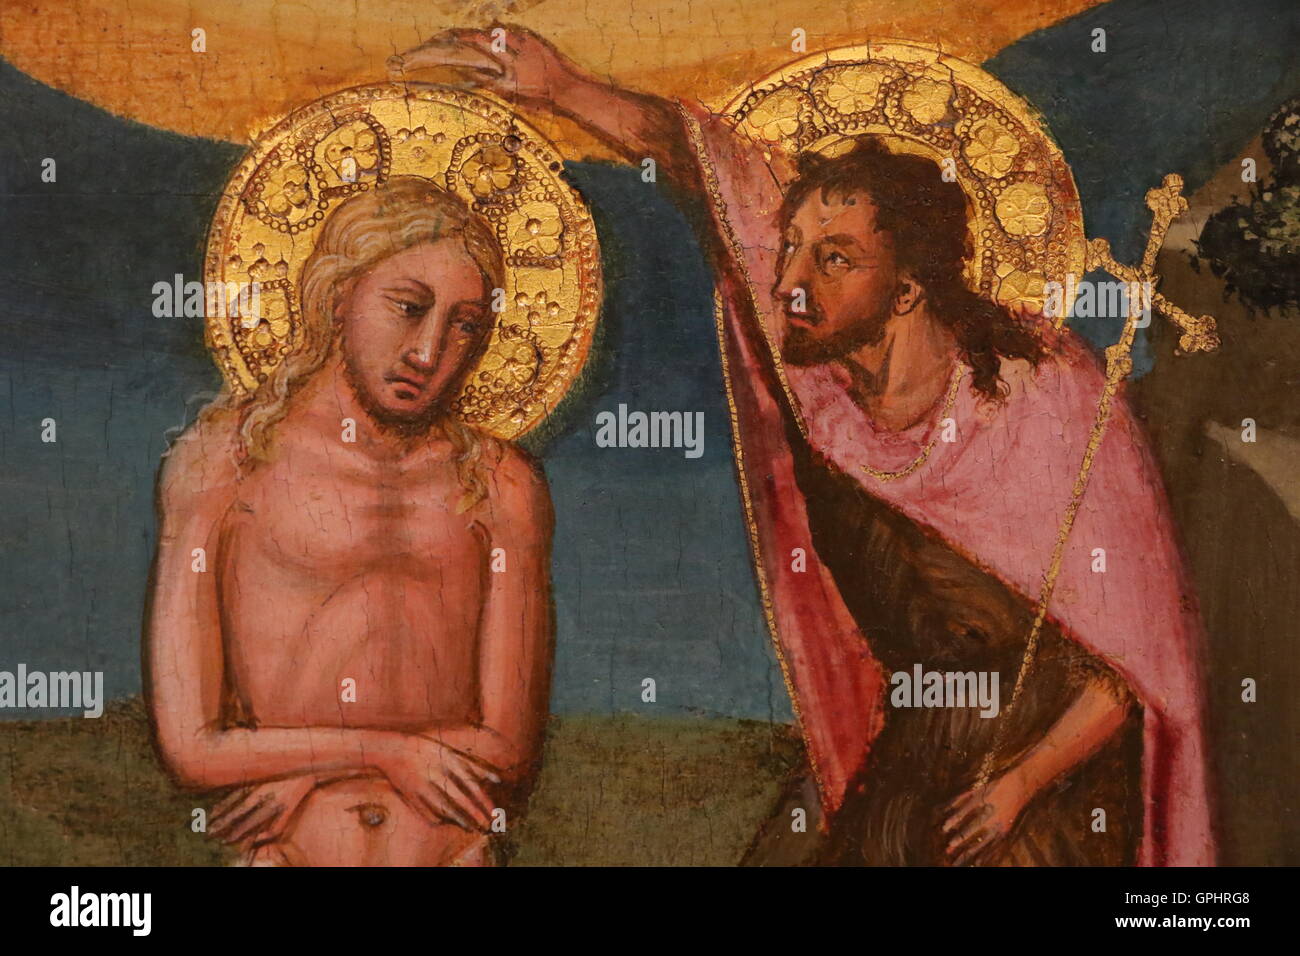 Detail of a religious painting in the Capitoline museums in Rome Stock Photo